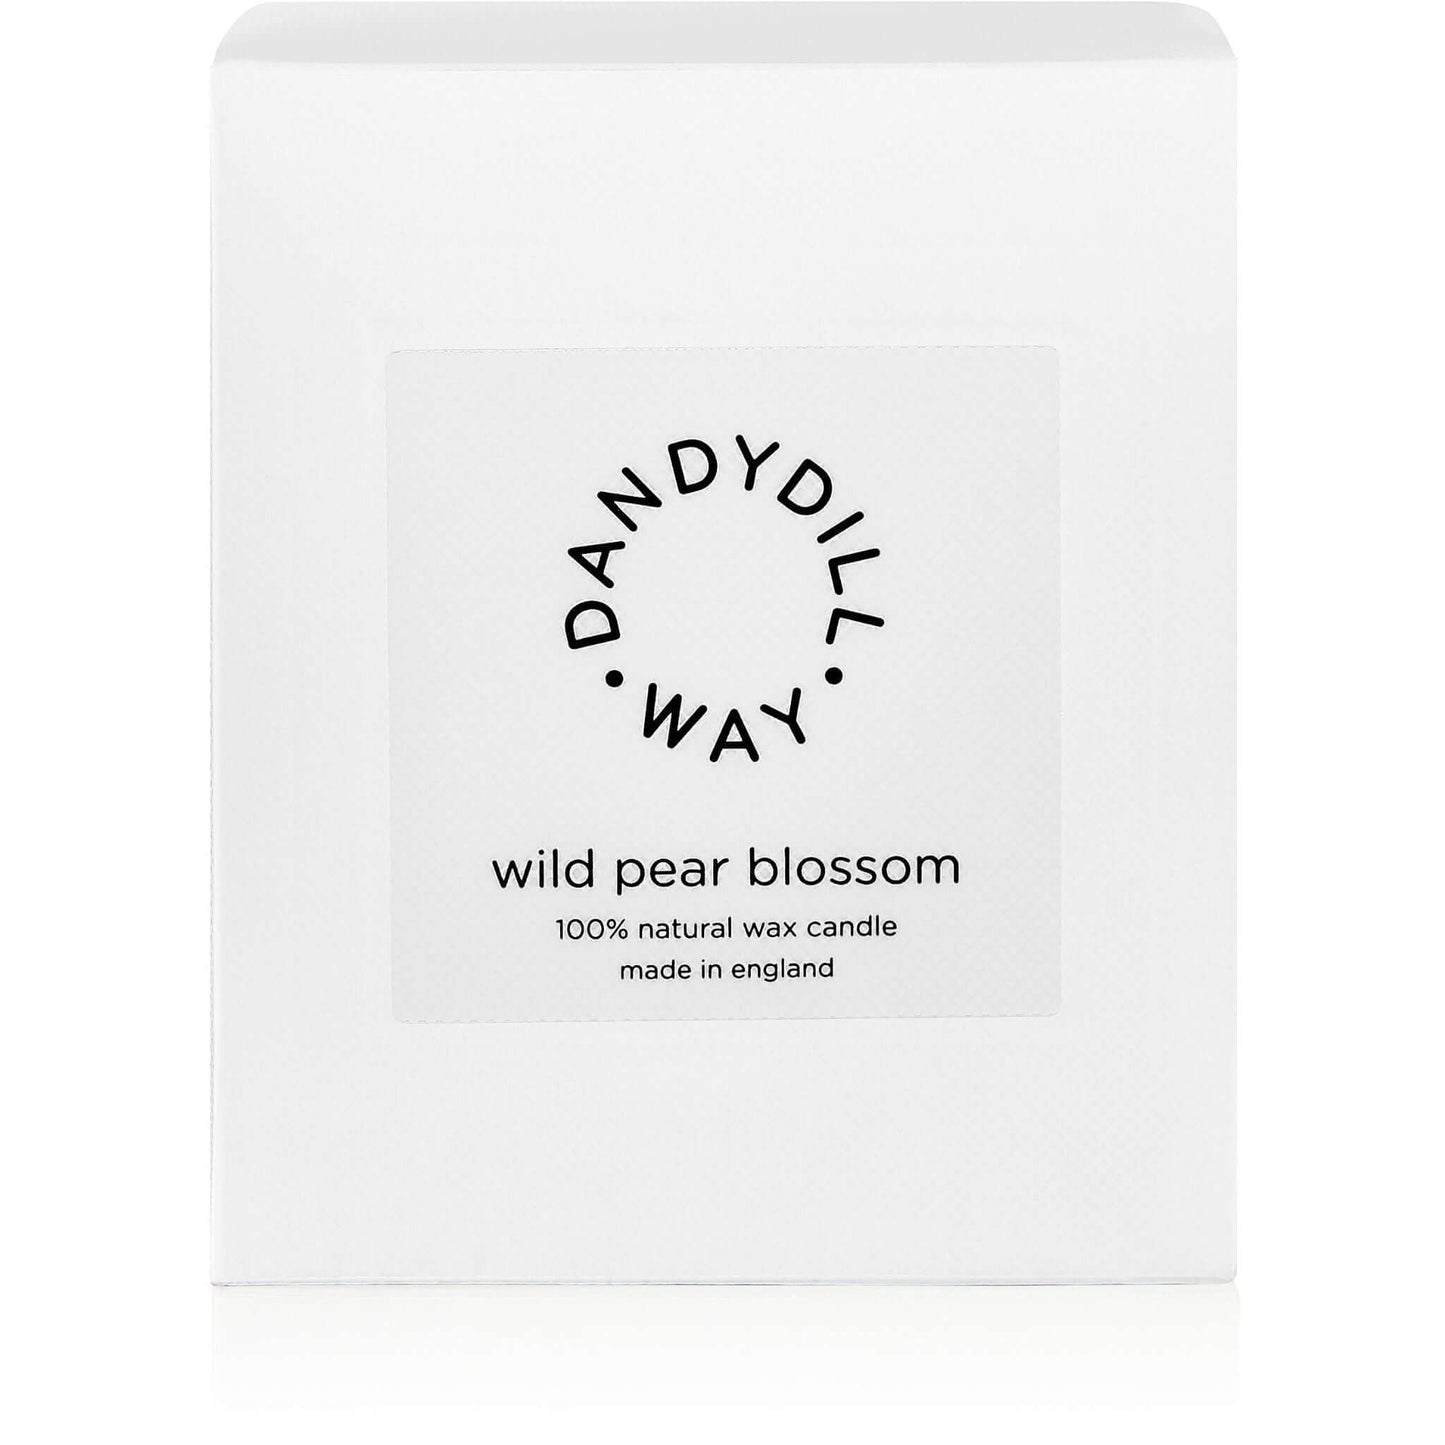 Wild Pear Blossom Room Candle  white branded box from Dandydill Way